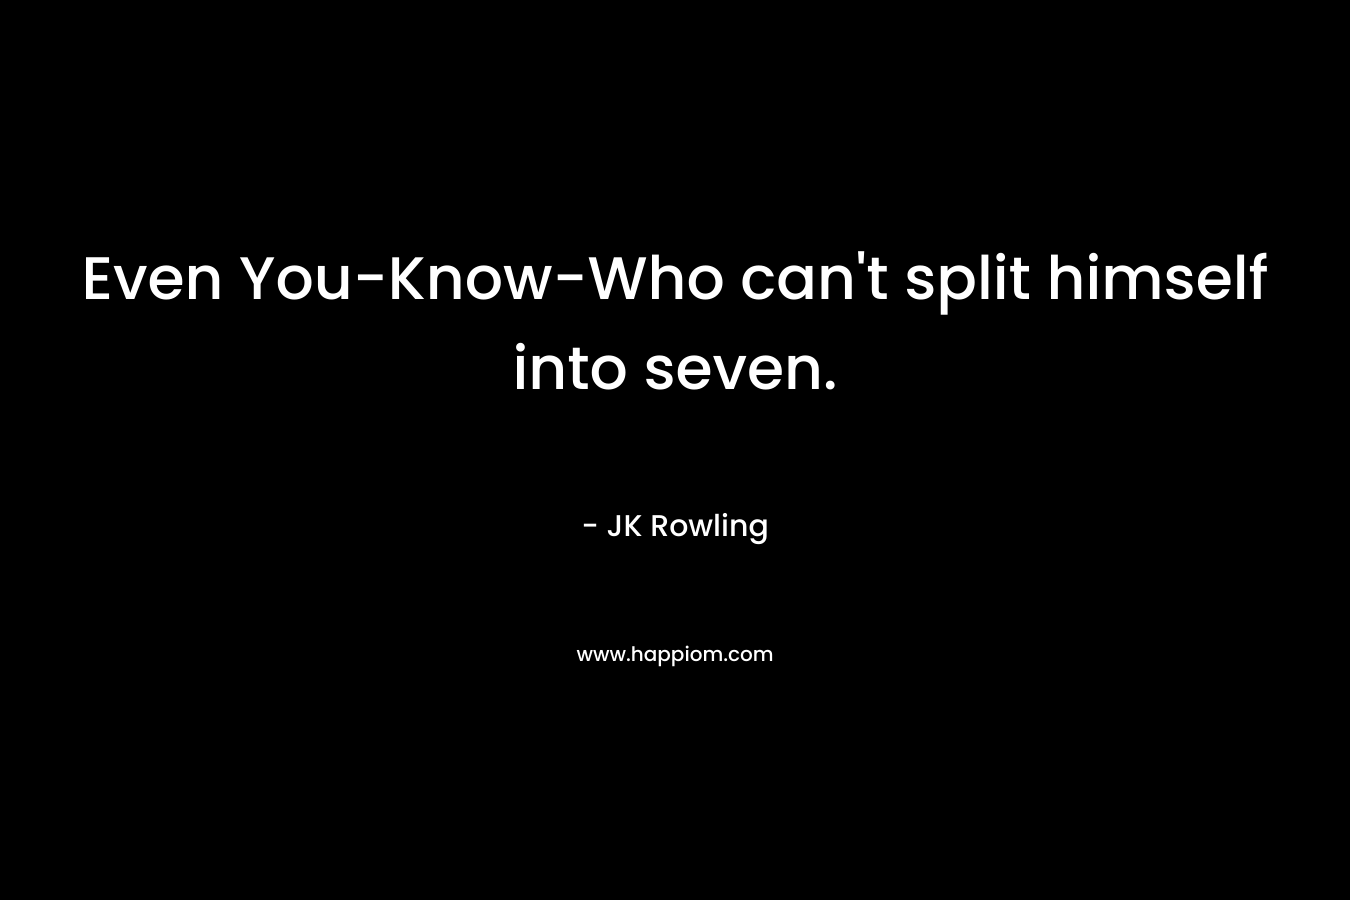 Even You-Know-Who can’t split himself into seven. – JK Rowling